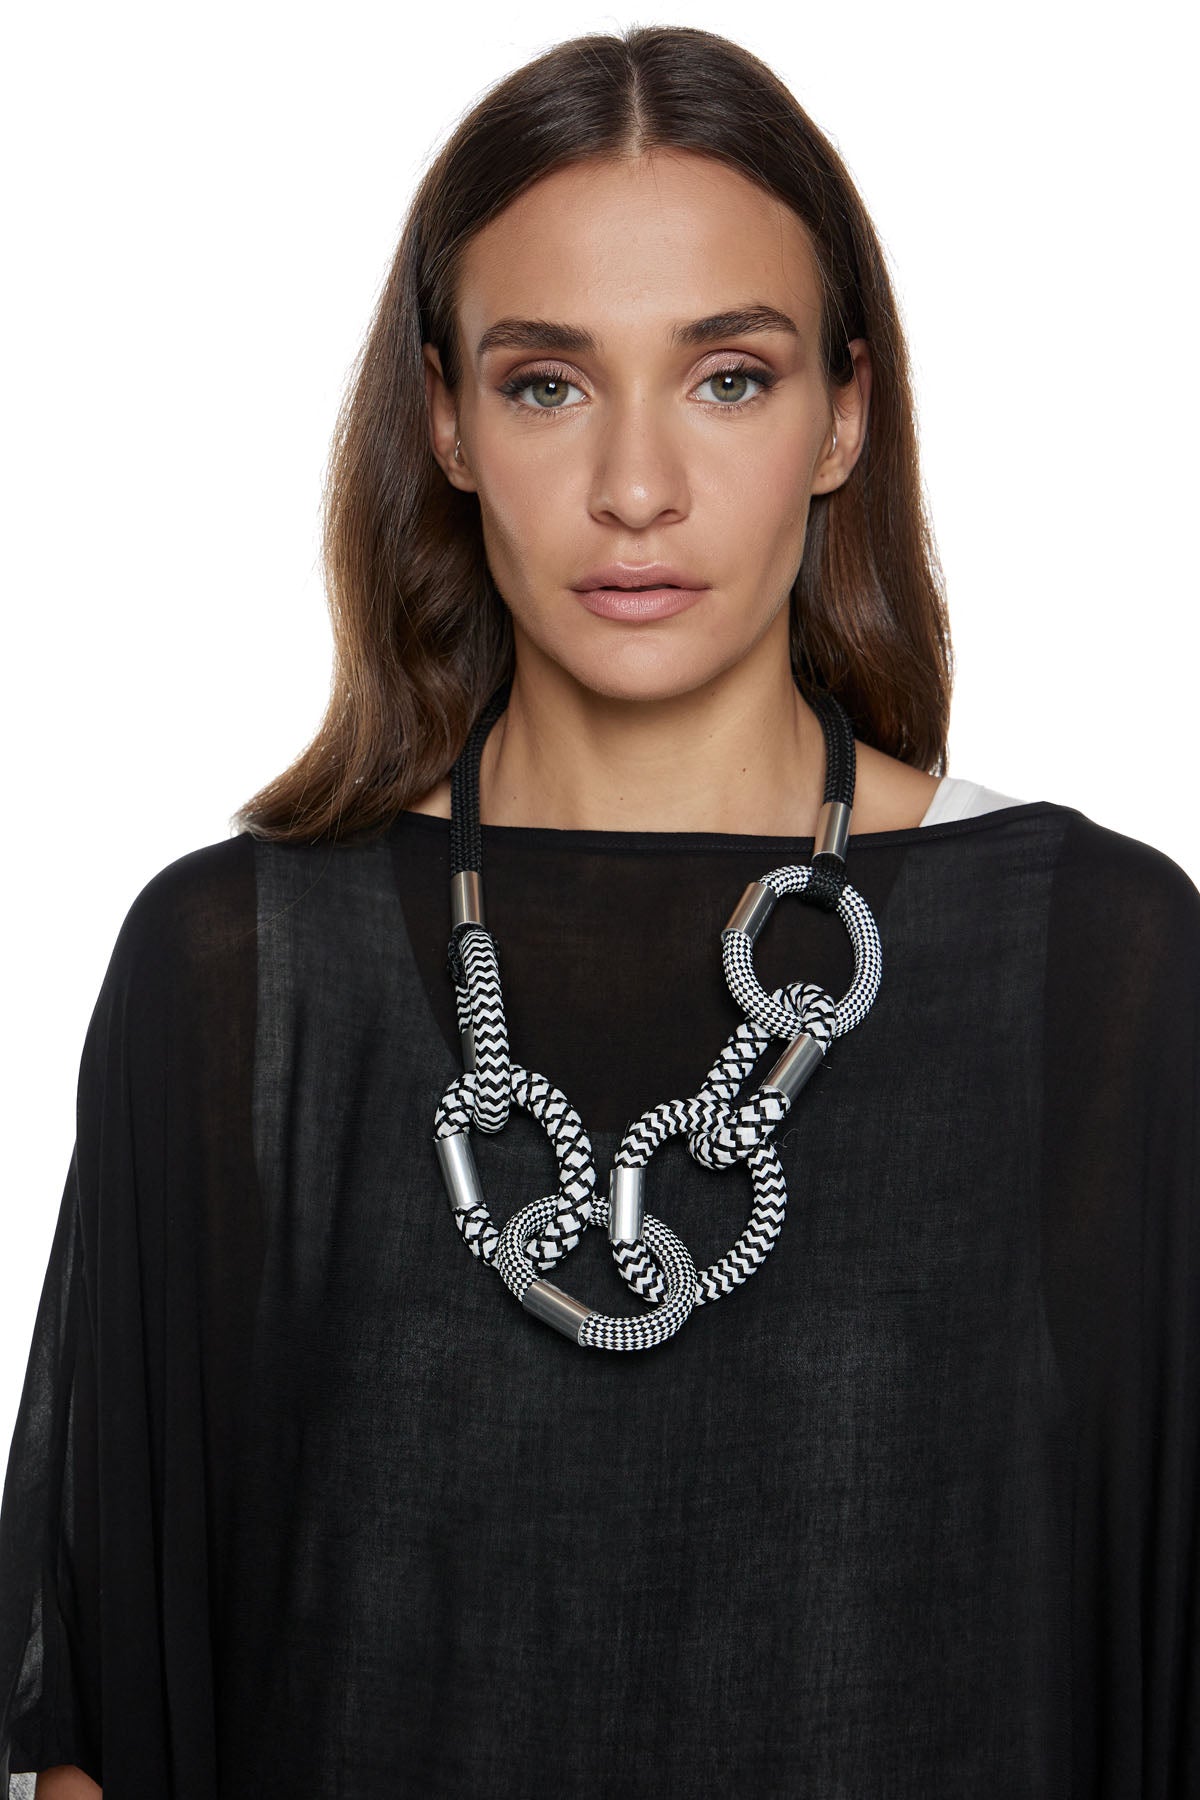 Chic & Simple Tie the Knot Necklace - Black and White